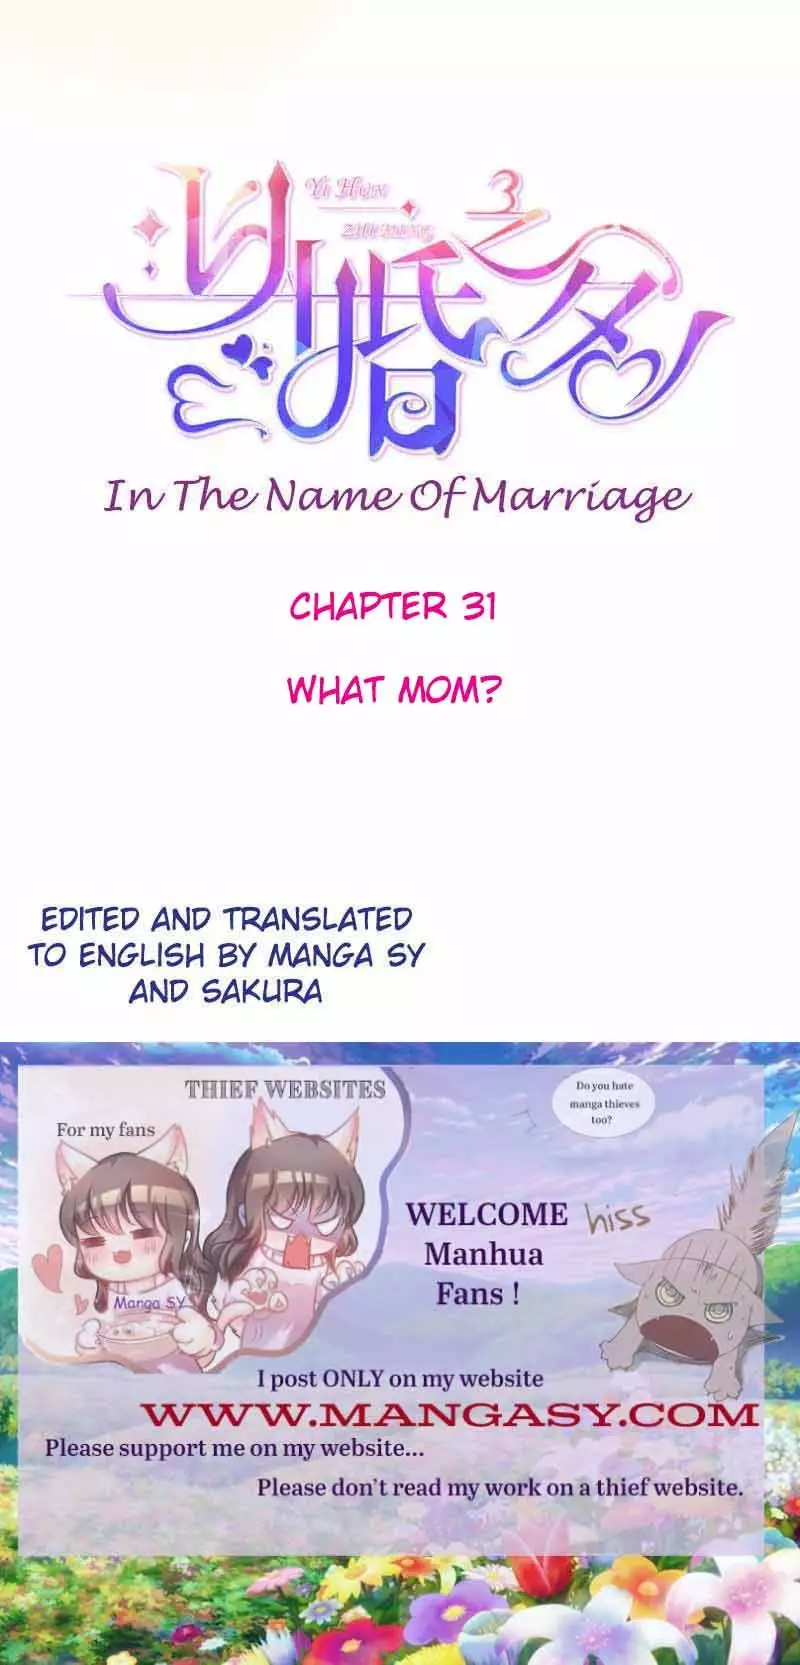 In The Name Of Marriage - 31 page 1-c72e44cf